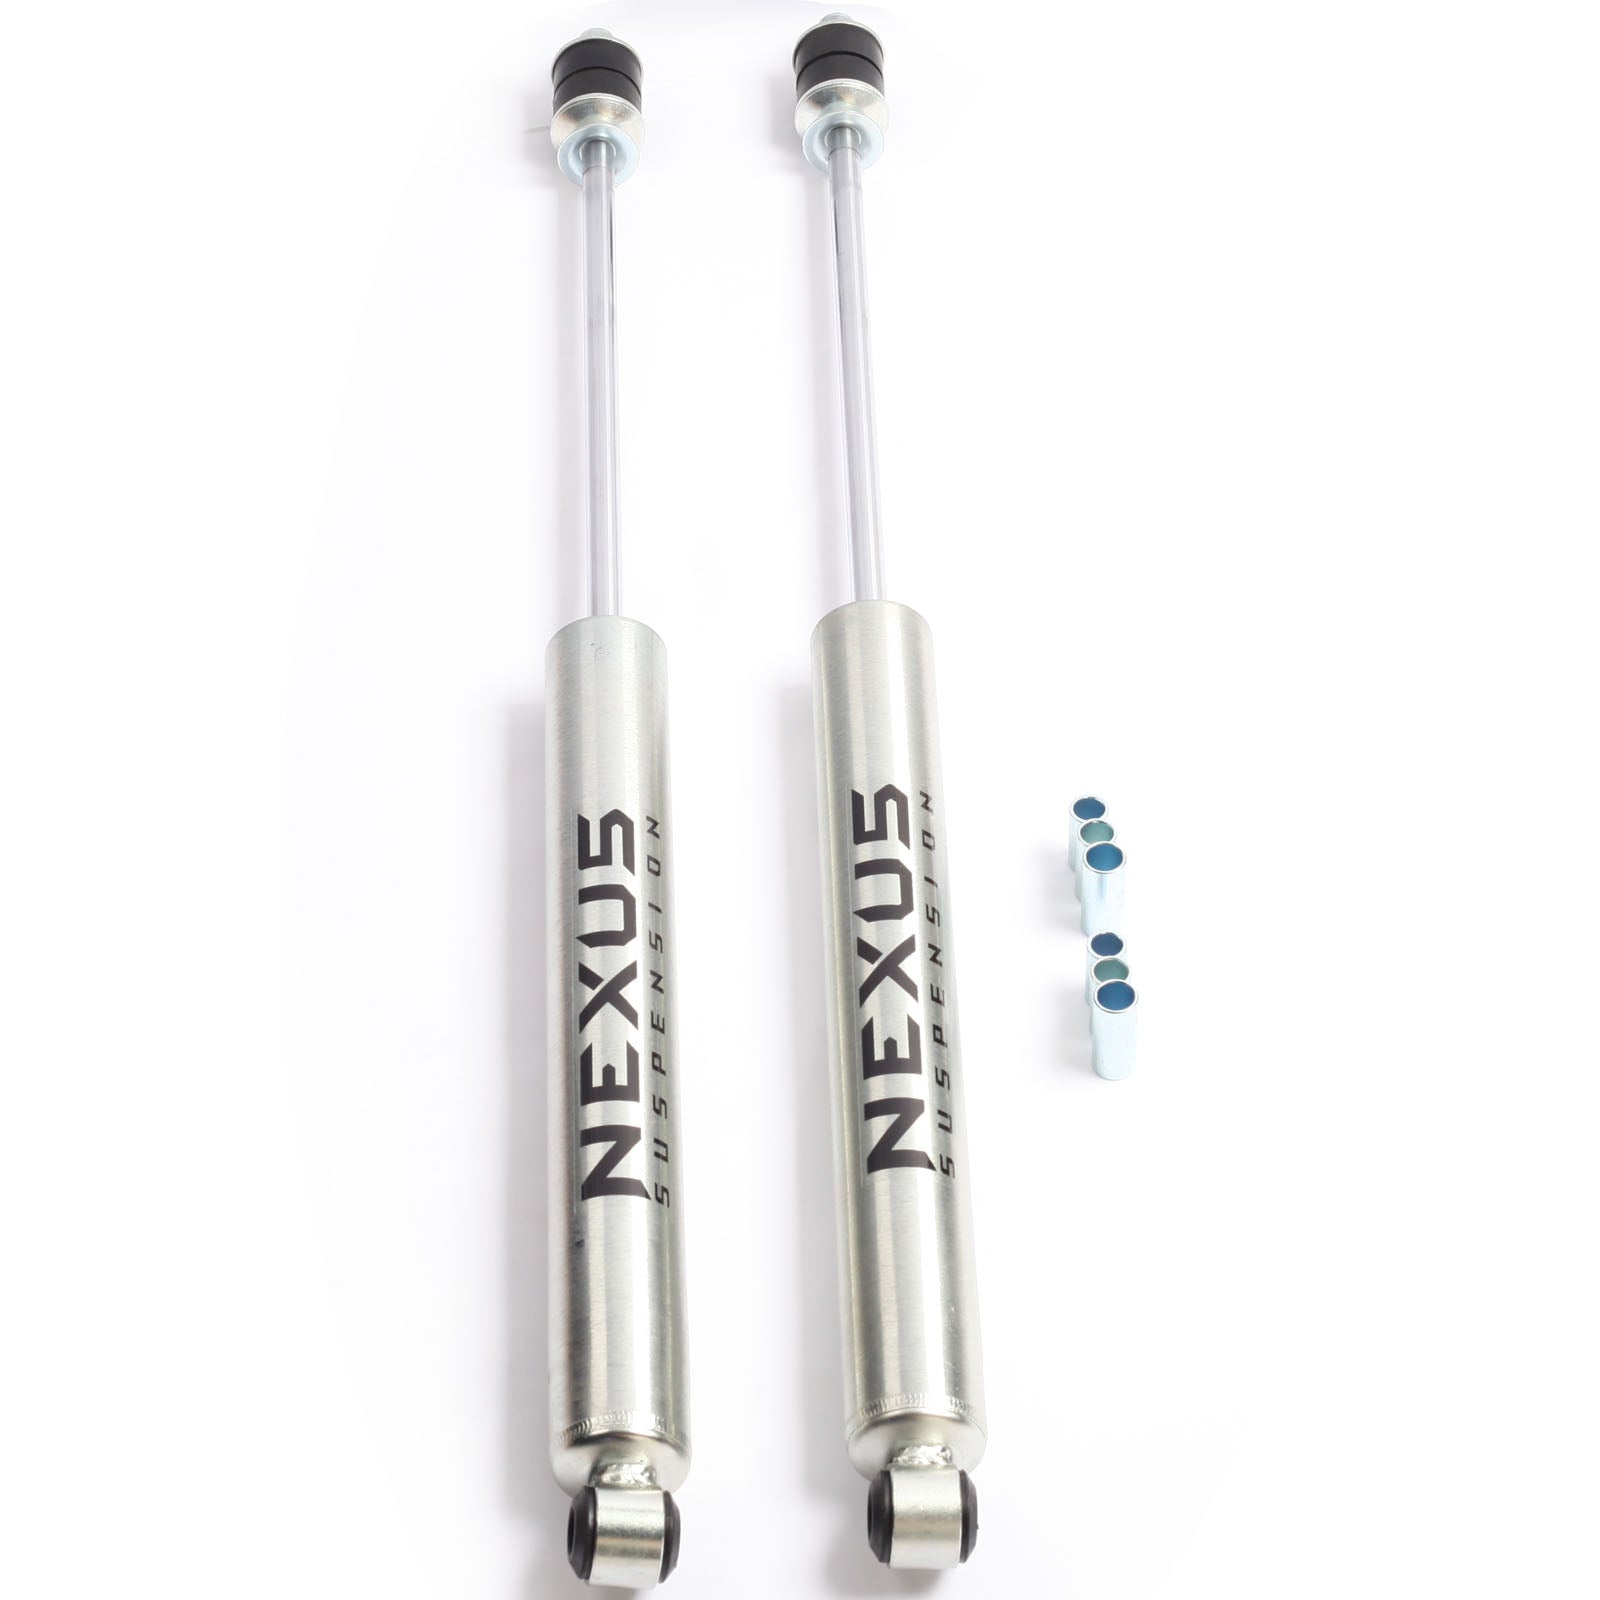 NEXUS SUSPENSION 2-3 Inch Lift Rear Shock Absorber for Ford F-150 1997-2003,Zinc Plated Coating,Pair Pack